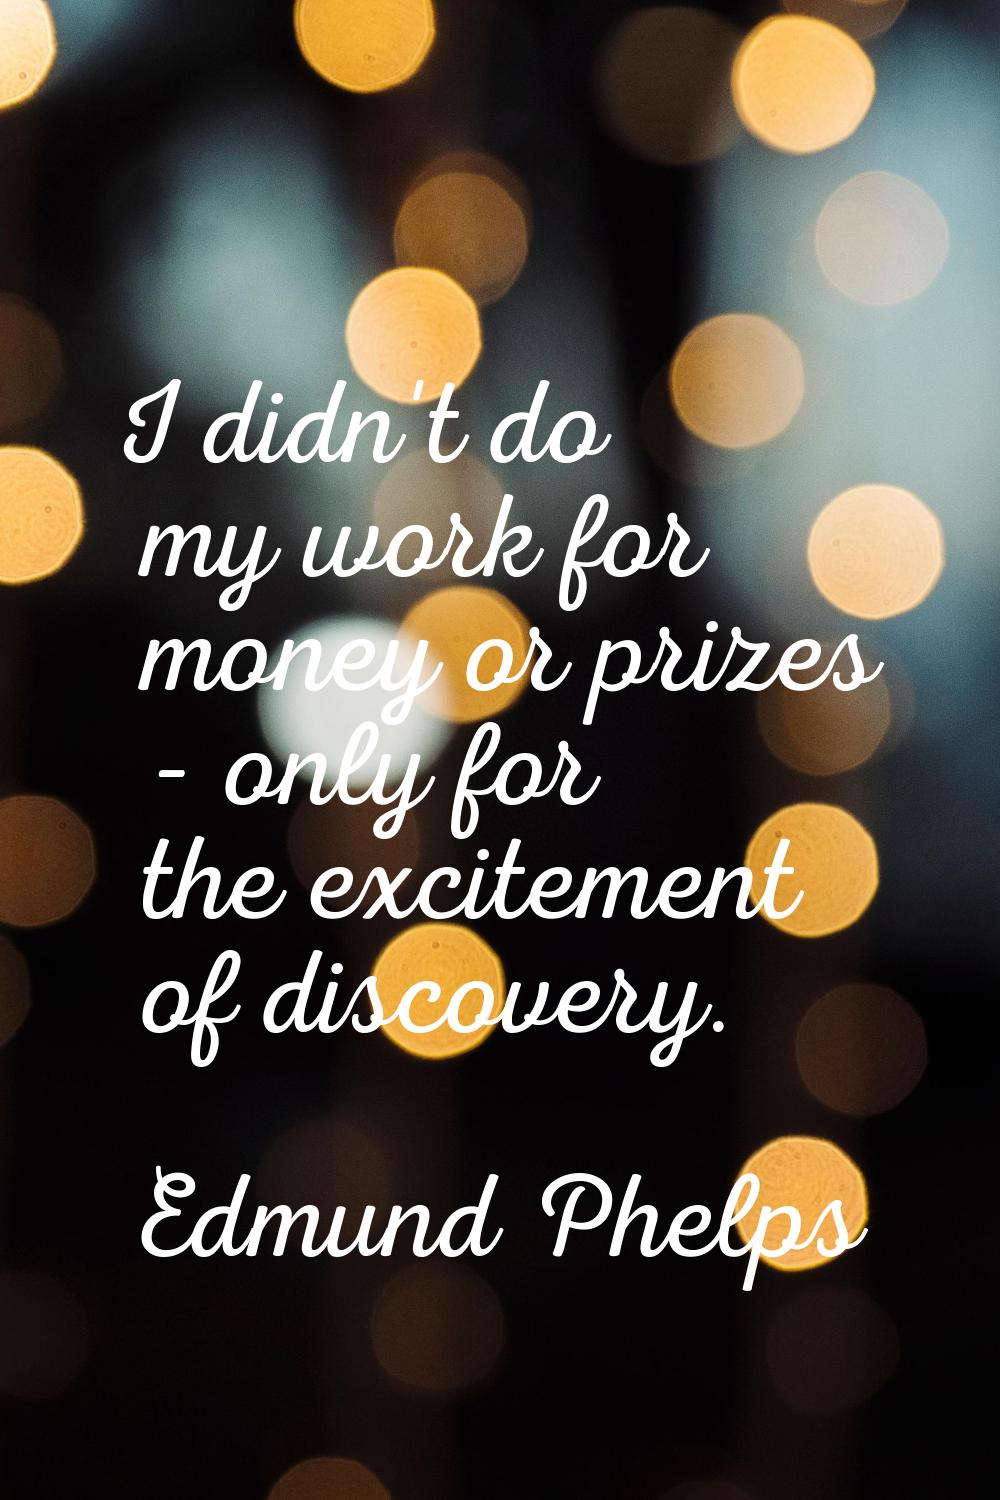 I didn't do my work for money or prizes - only for the excitement of discovery.